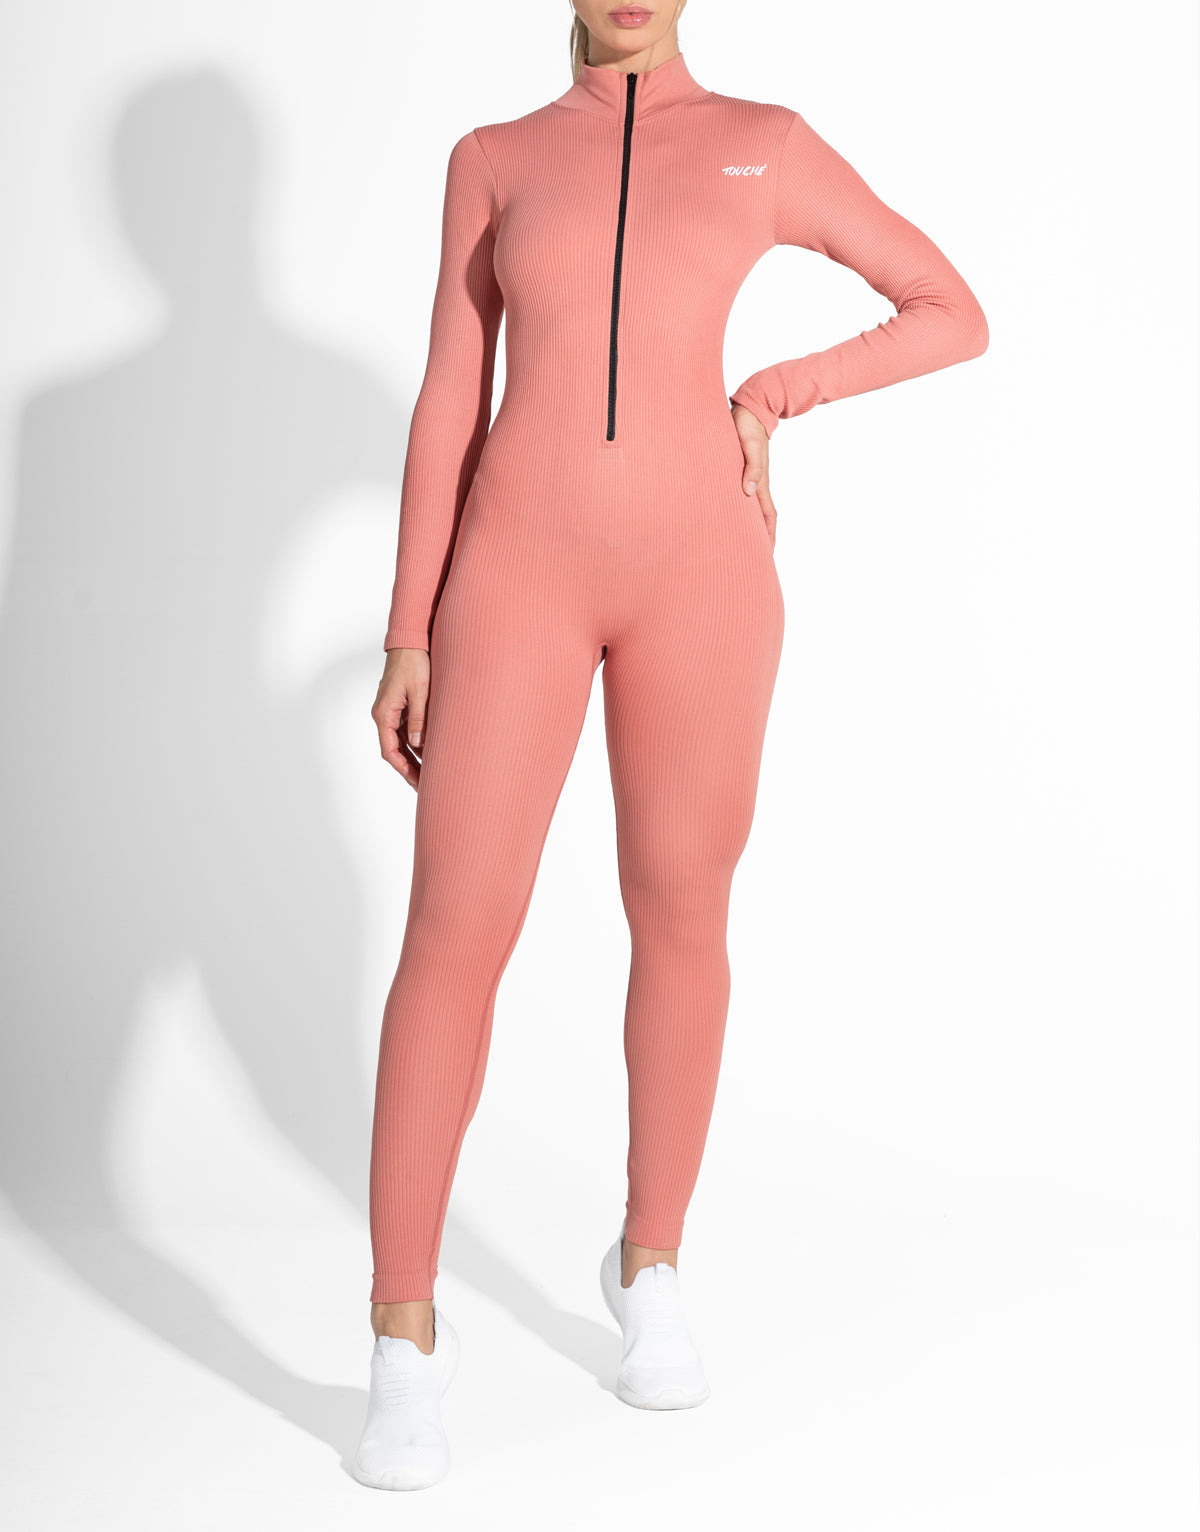 CORAL CATSUIT SEAMLESS